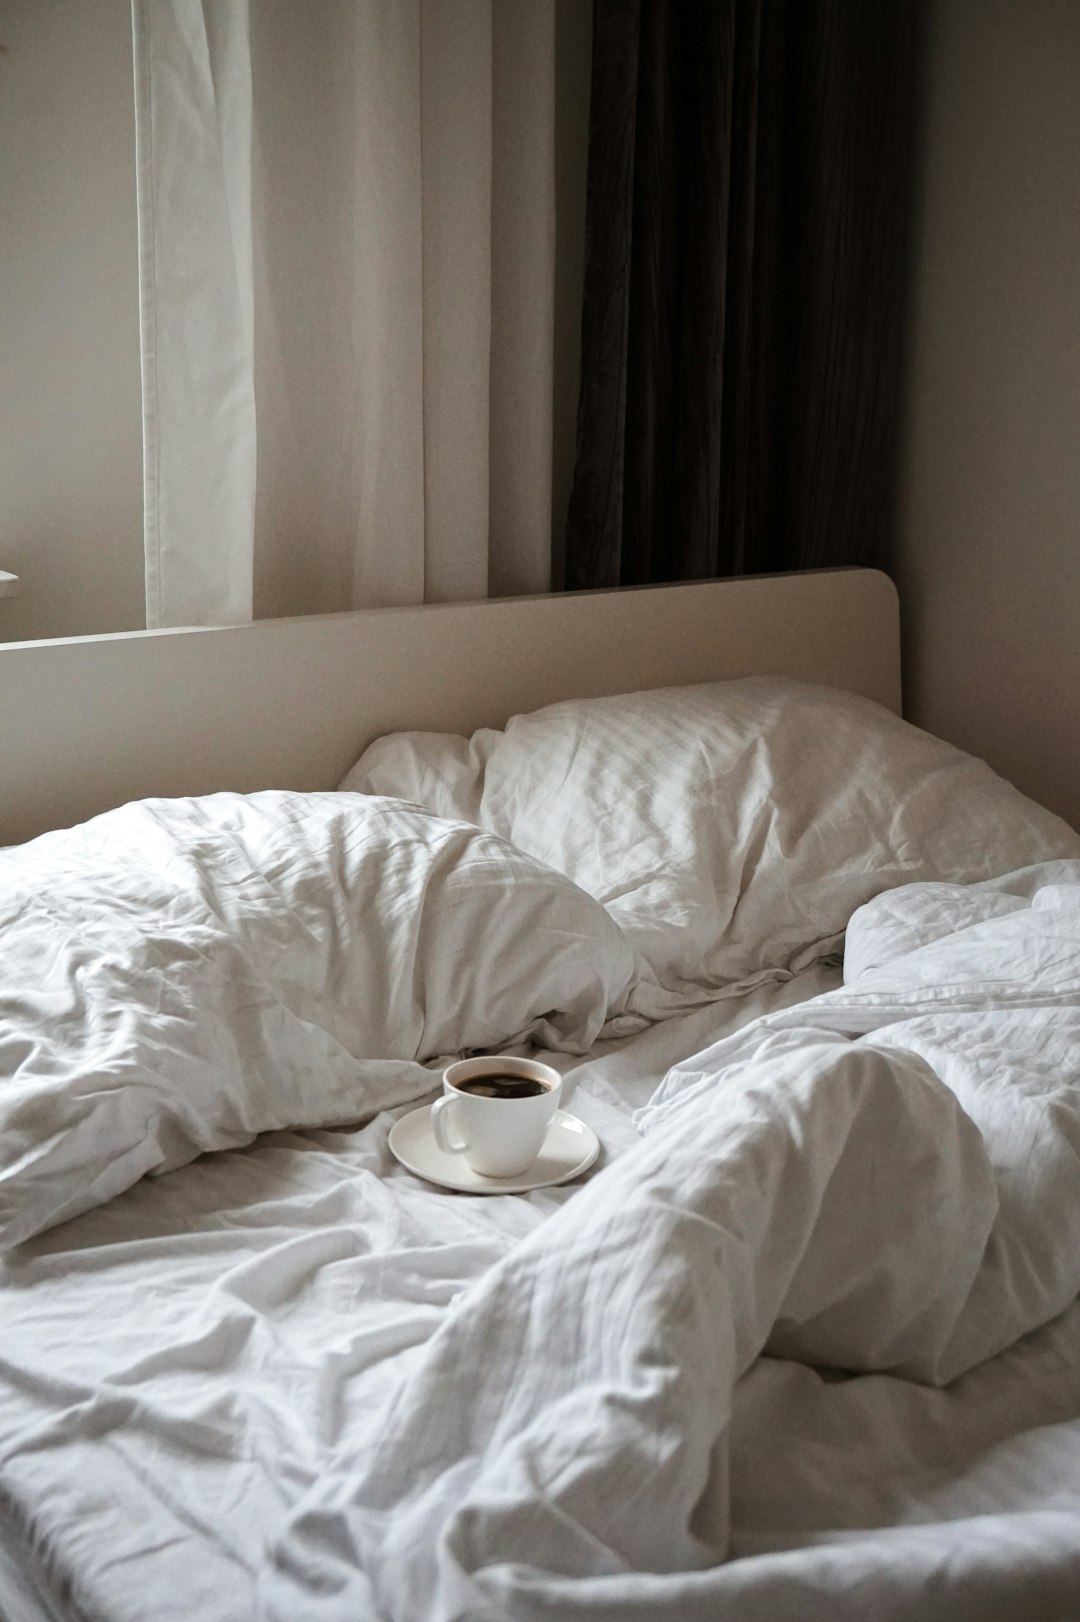  coffee on cup on bed double bed